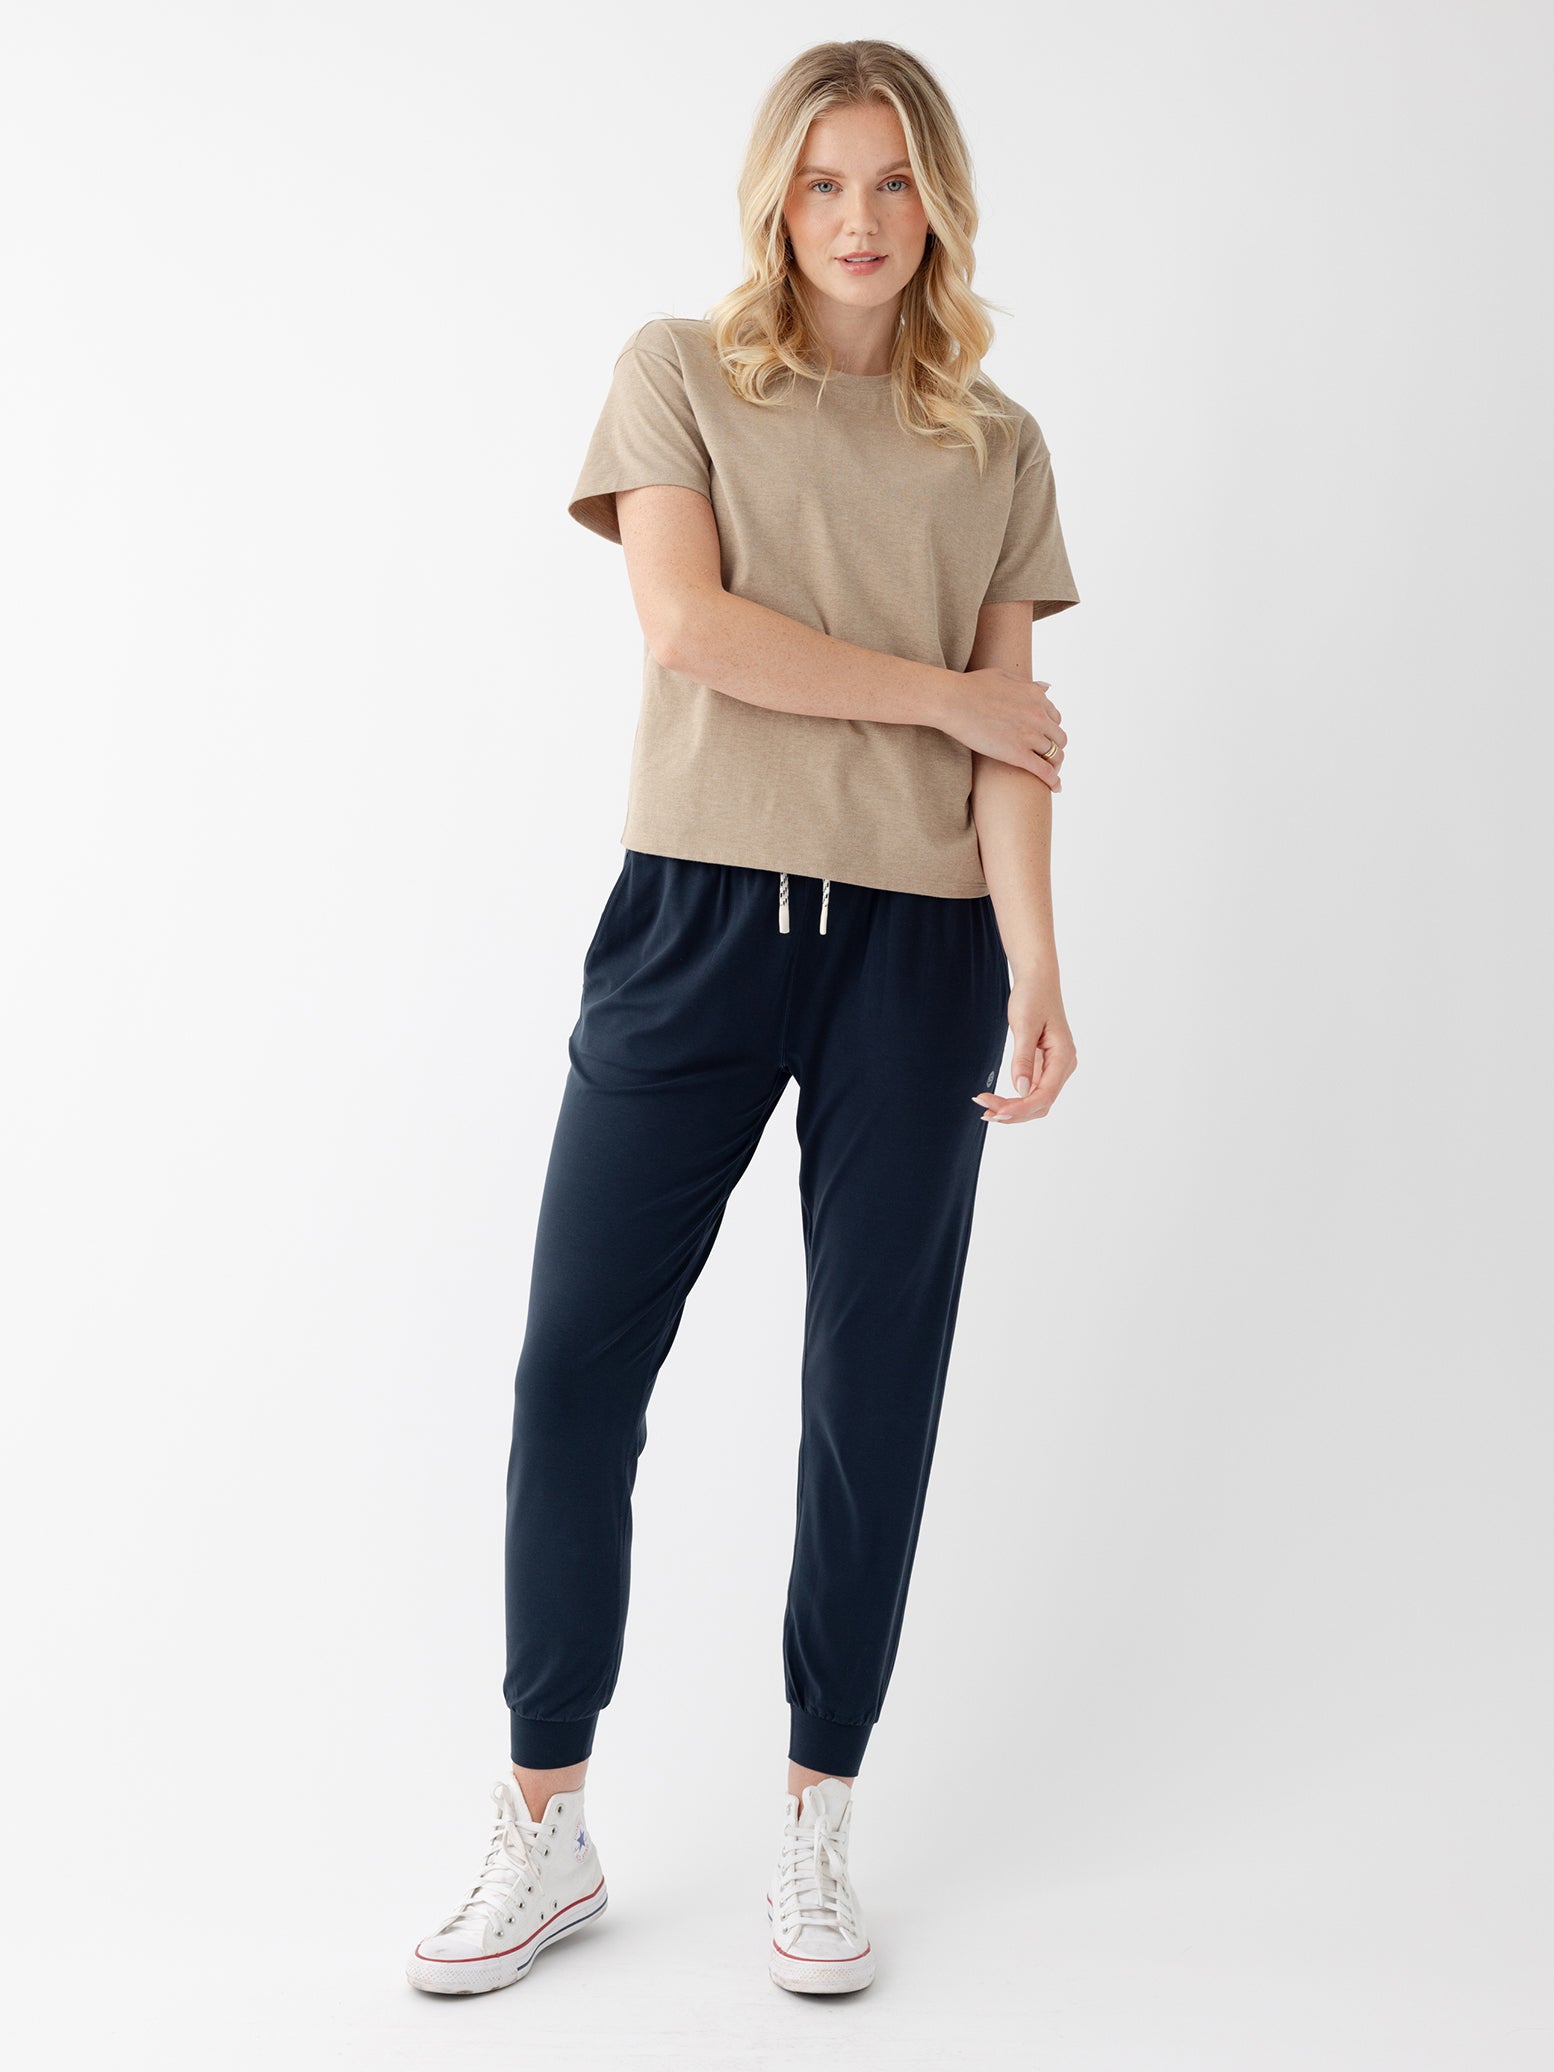 Woman wearing beech heather tee and eclipse joggers with white background |Color:Beech Heather